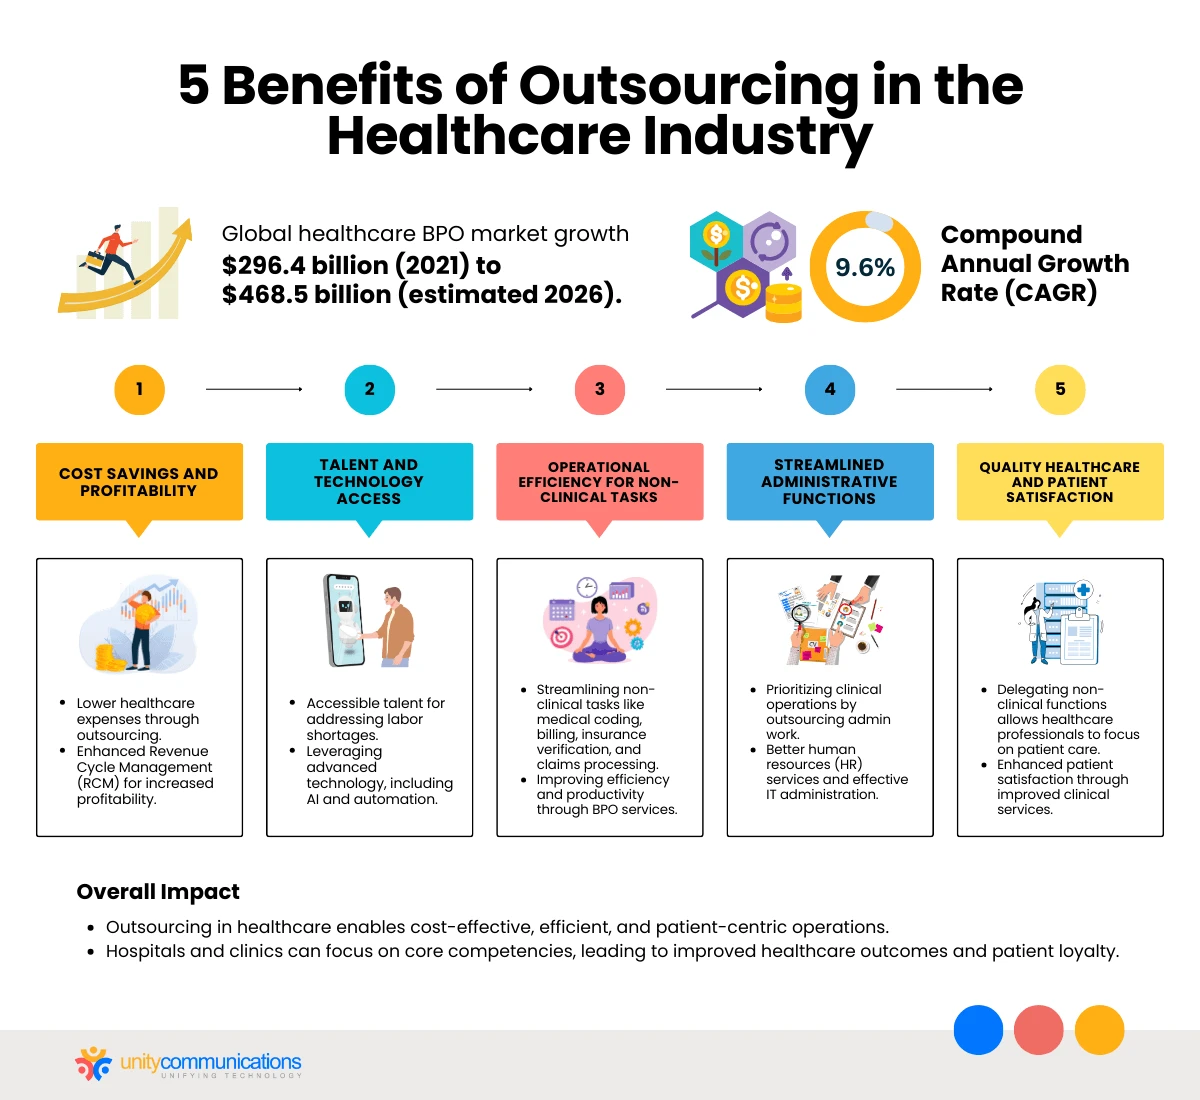 5 Benefits of Outsourcing in the Healthcare Industry